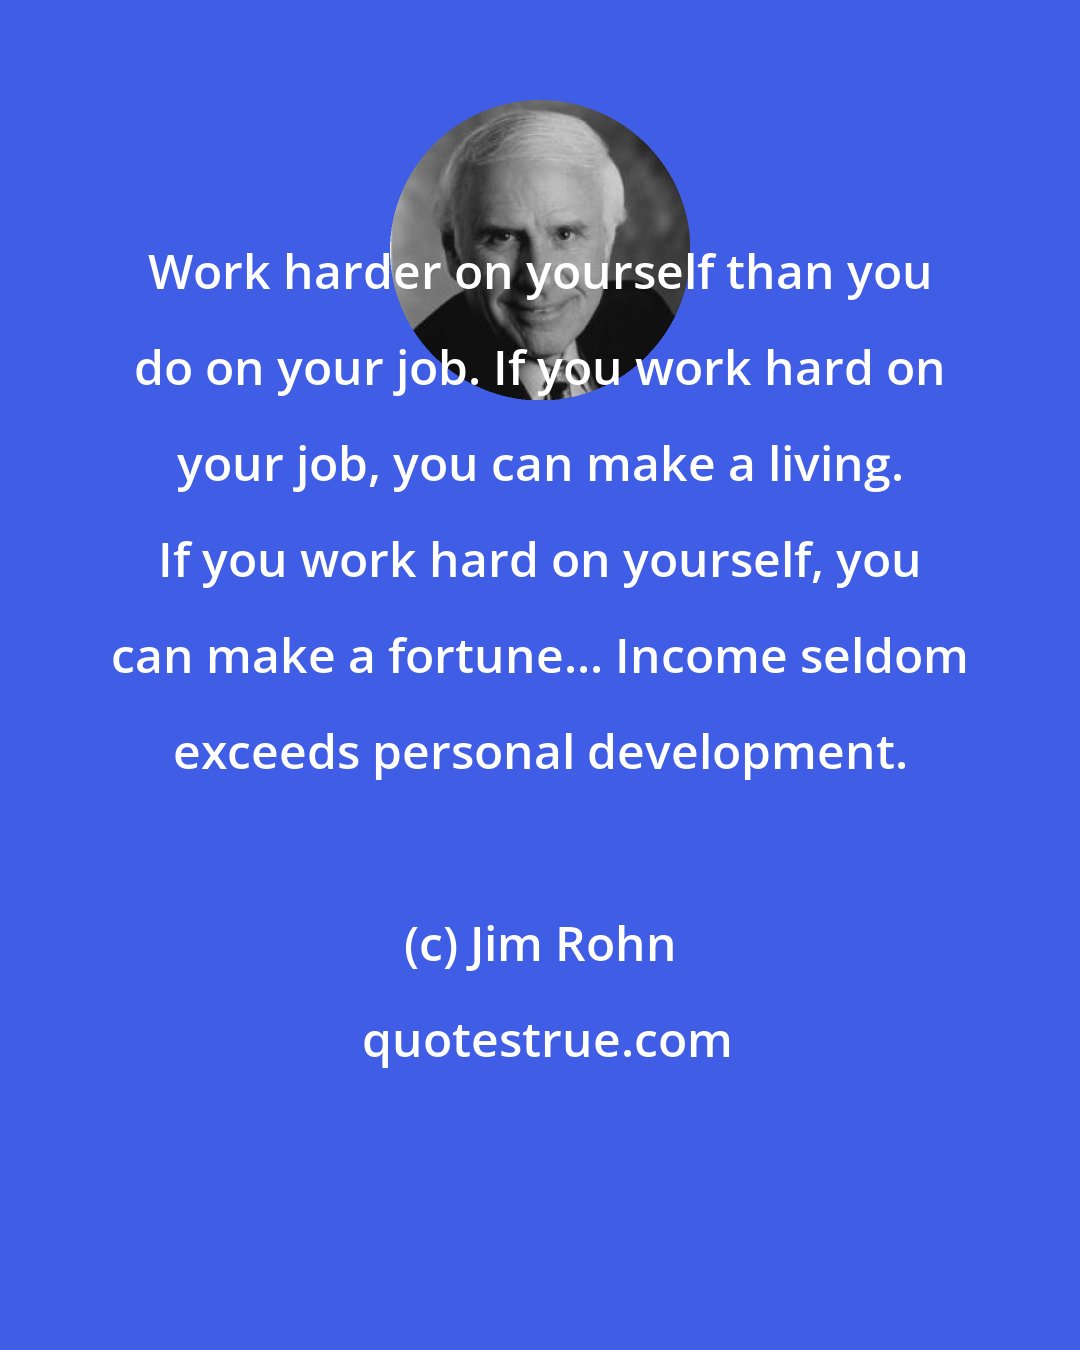 Jim Rohn: Work harder on yourself than you do on your job. If you work hard on your job, you can make a living. If you work hard on yourself, you can make a fortune... Income seldom exceeds personal development.